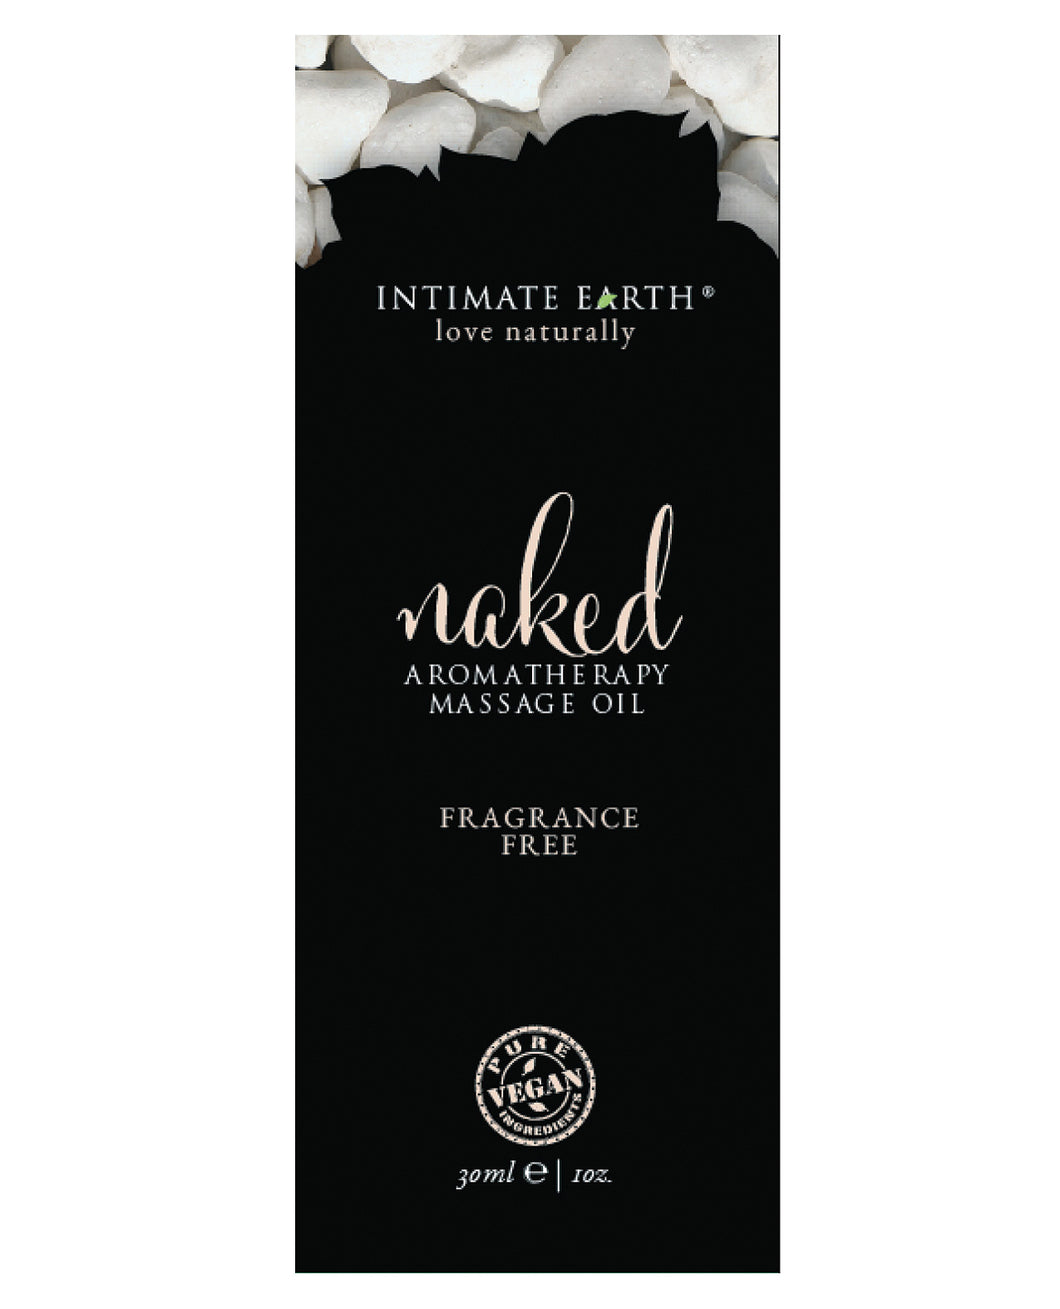 Intimate Earth Naked Massage Oil Foil - 30ml